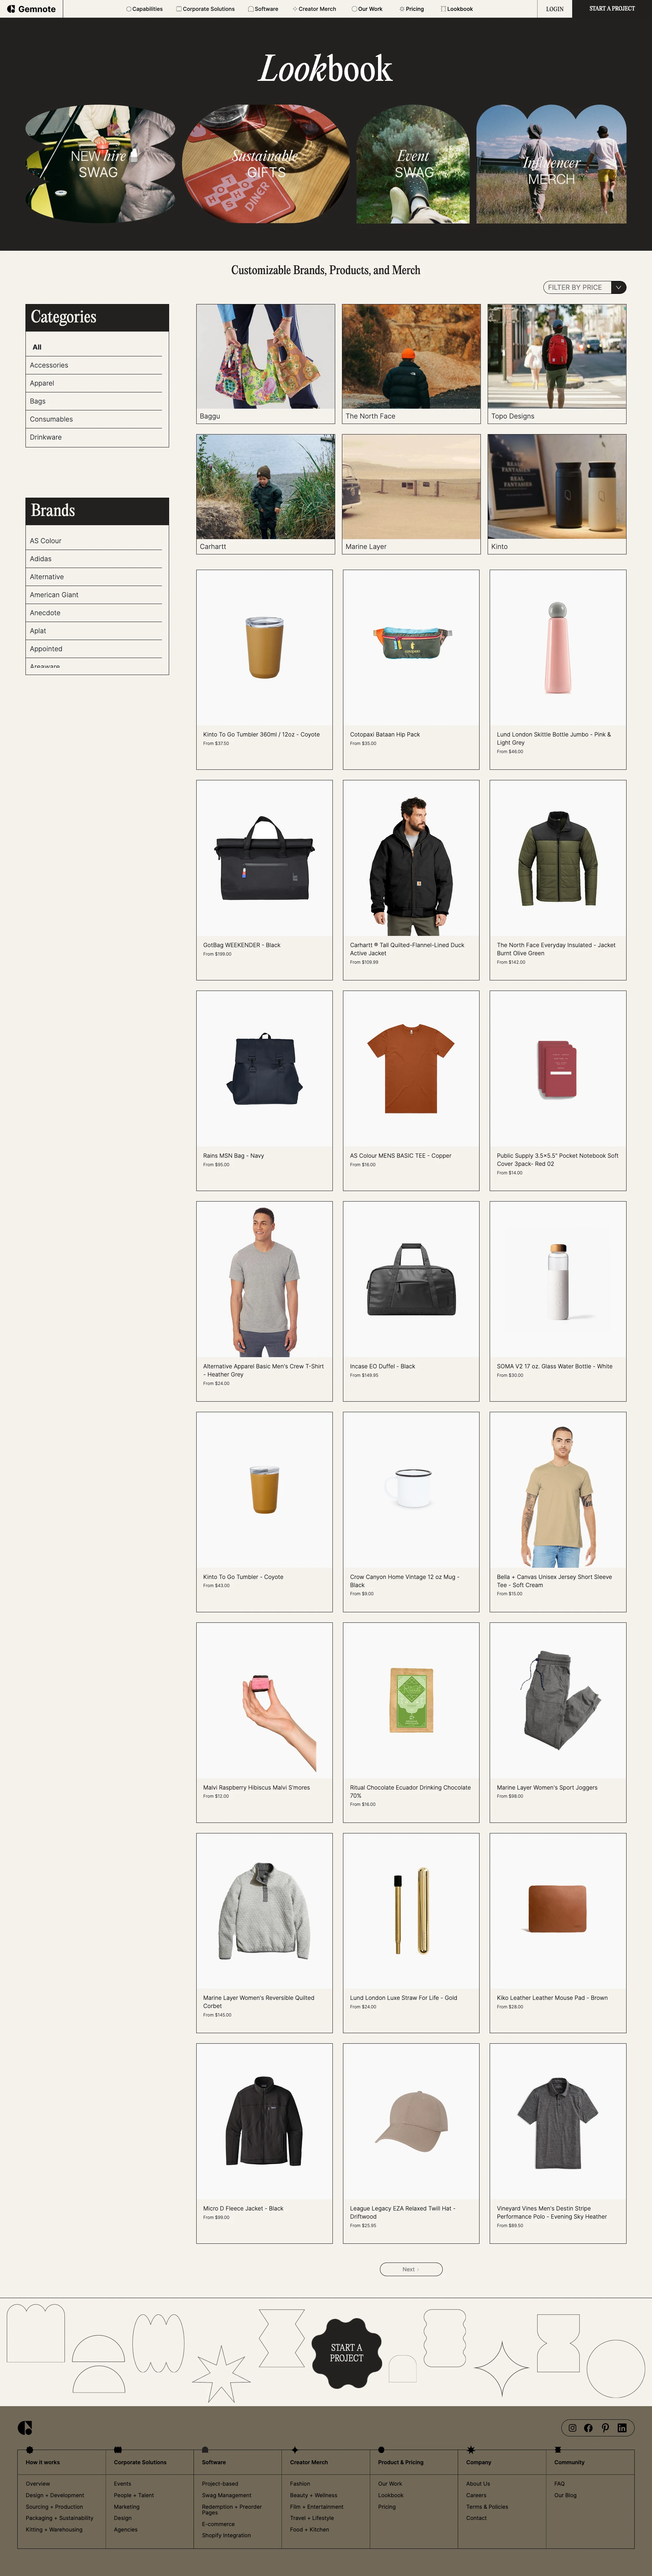 Gemnote Landing Page Example: Easiest way to order custom promotional products, branded merch and employee swag for your business. We have the best affordable premium products to bring your vision to life at the right price point.